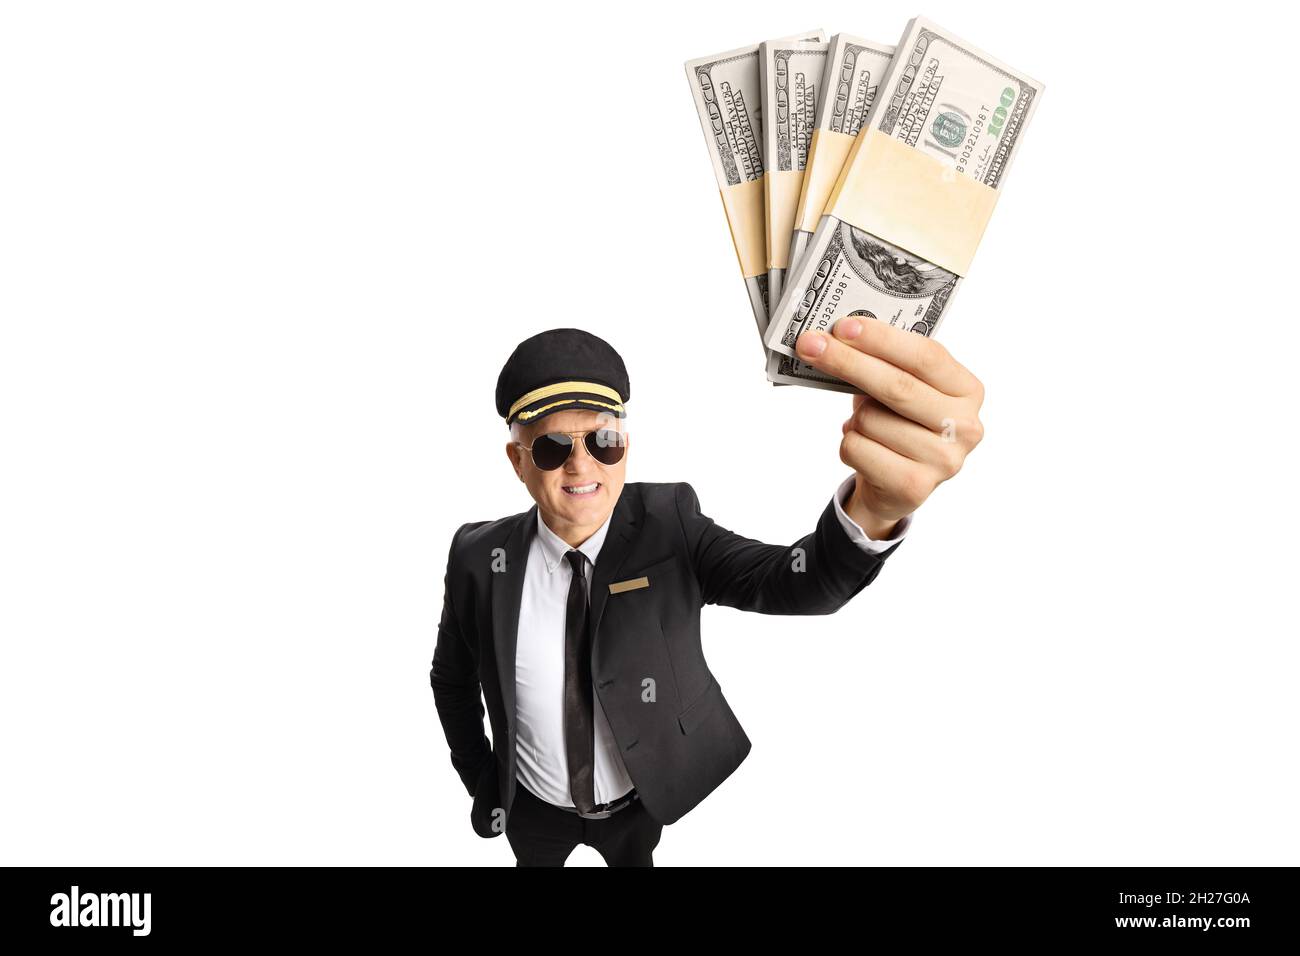 Chauffeur in a uniform holding a stacks of money in front of camera isolated on white background Stock Photo